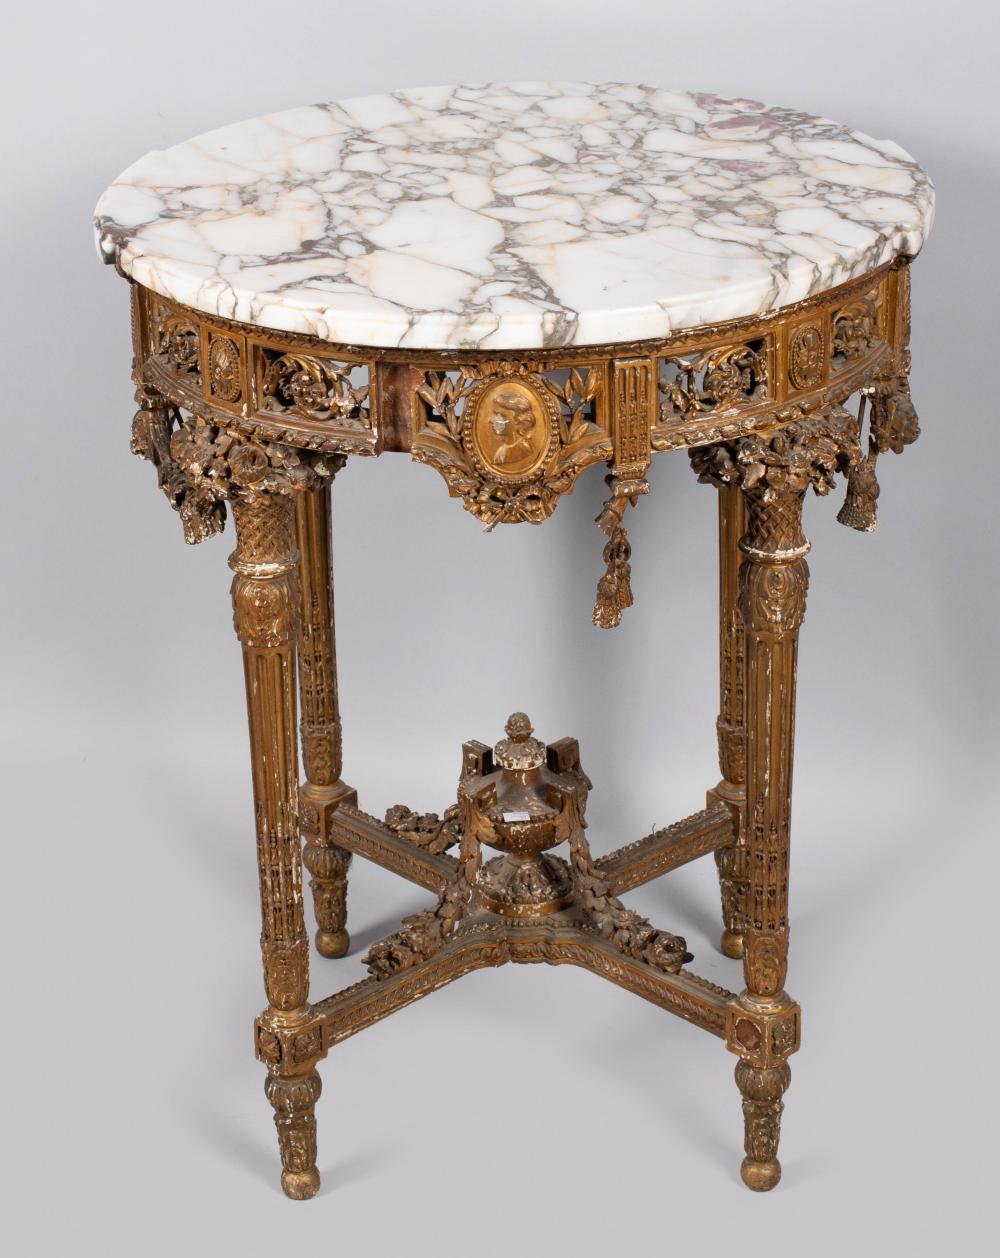 LOUIS XVI STYLE GILTWOOD AND COMPOSITION